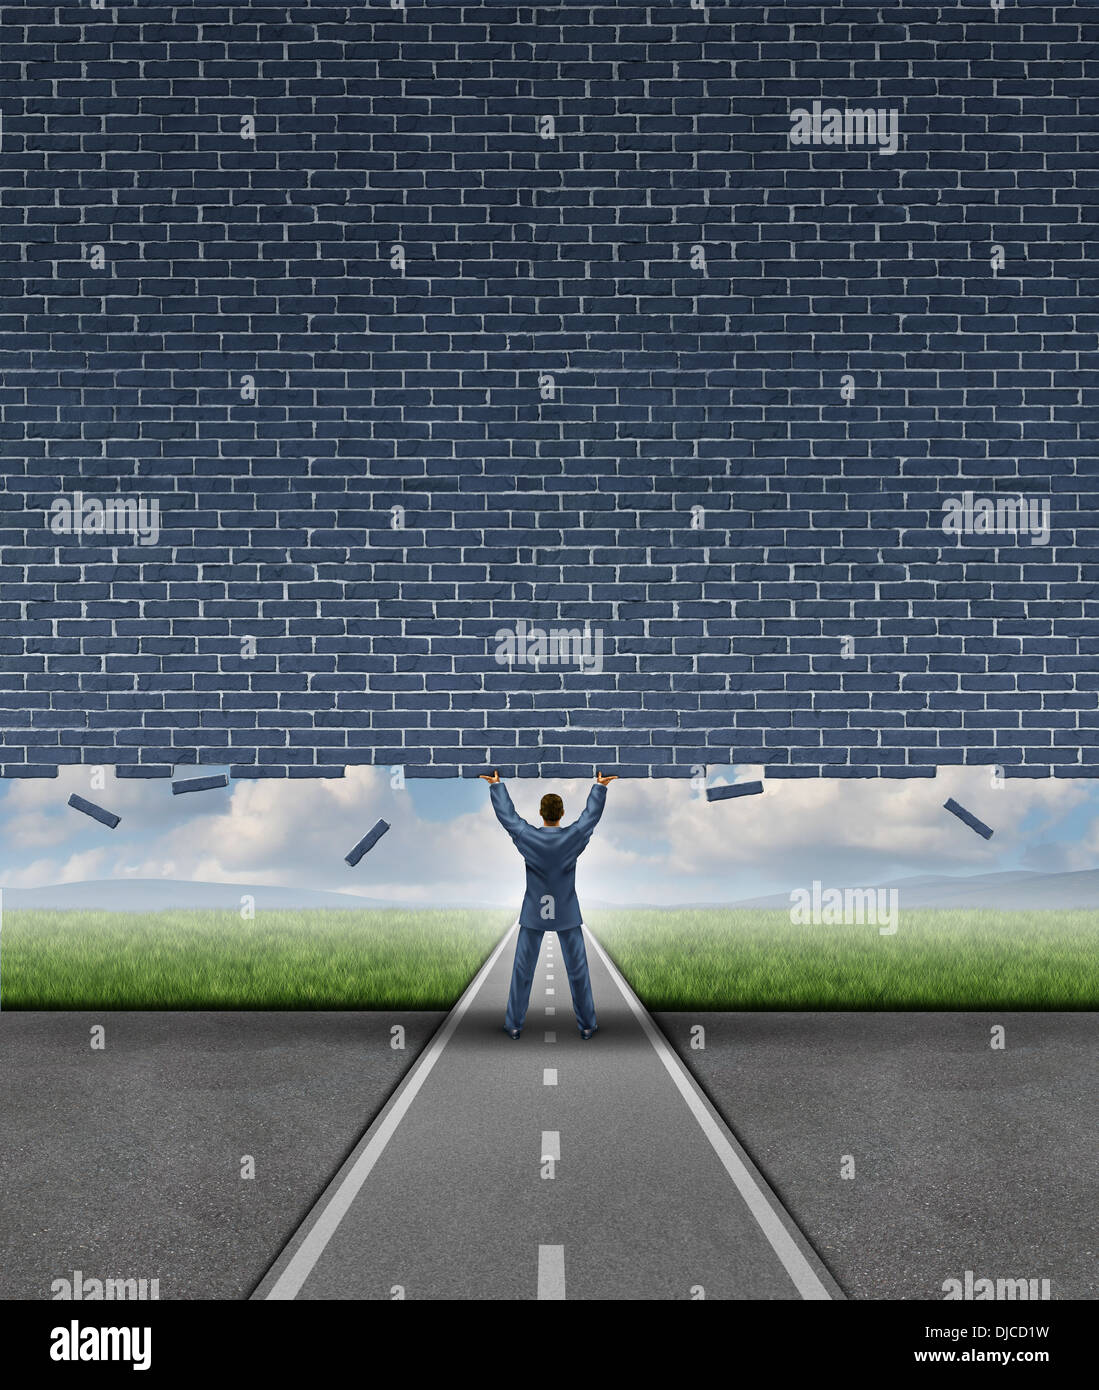 Open opportunity business concept with a strong businessman on a road or path lifting up a heavy brick wall breaking free and opening up a doorway and removing an obstacle to success through leadership and vision. Stock Photo